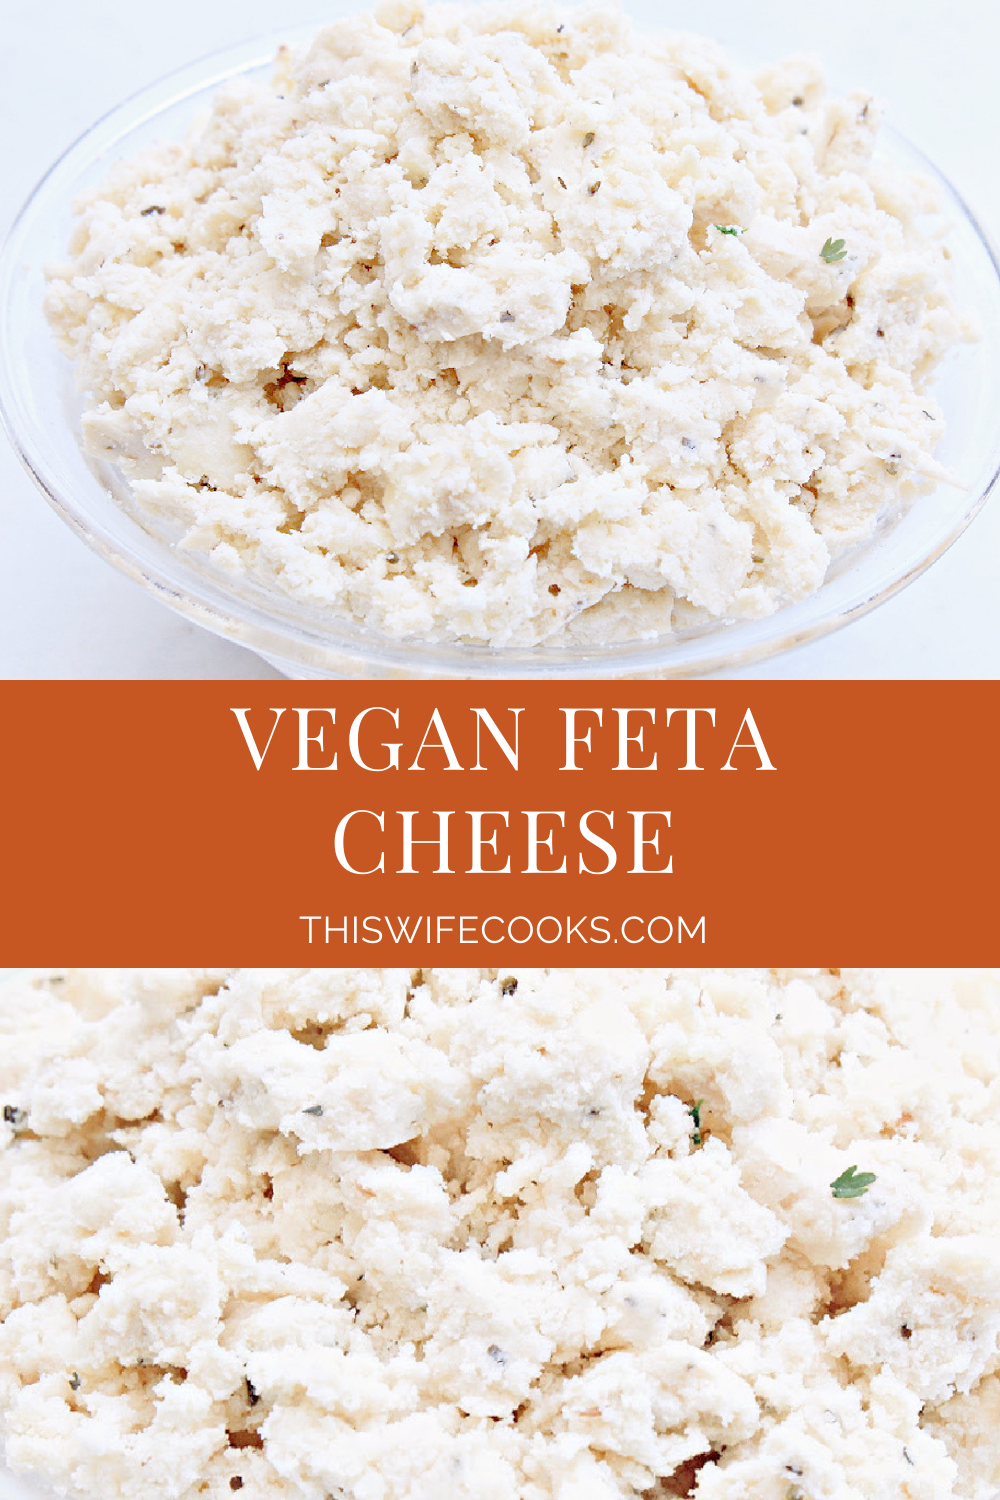 Vegan Tofu Feta Cheese ~ This dairy-free cheese is made on the stovetop then chilled to perfection for vegan feta that can be used for salads, casseroles, pizzas, and more! via @thiswifecooks